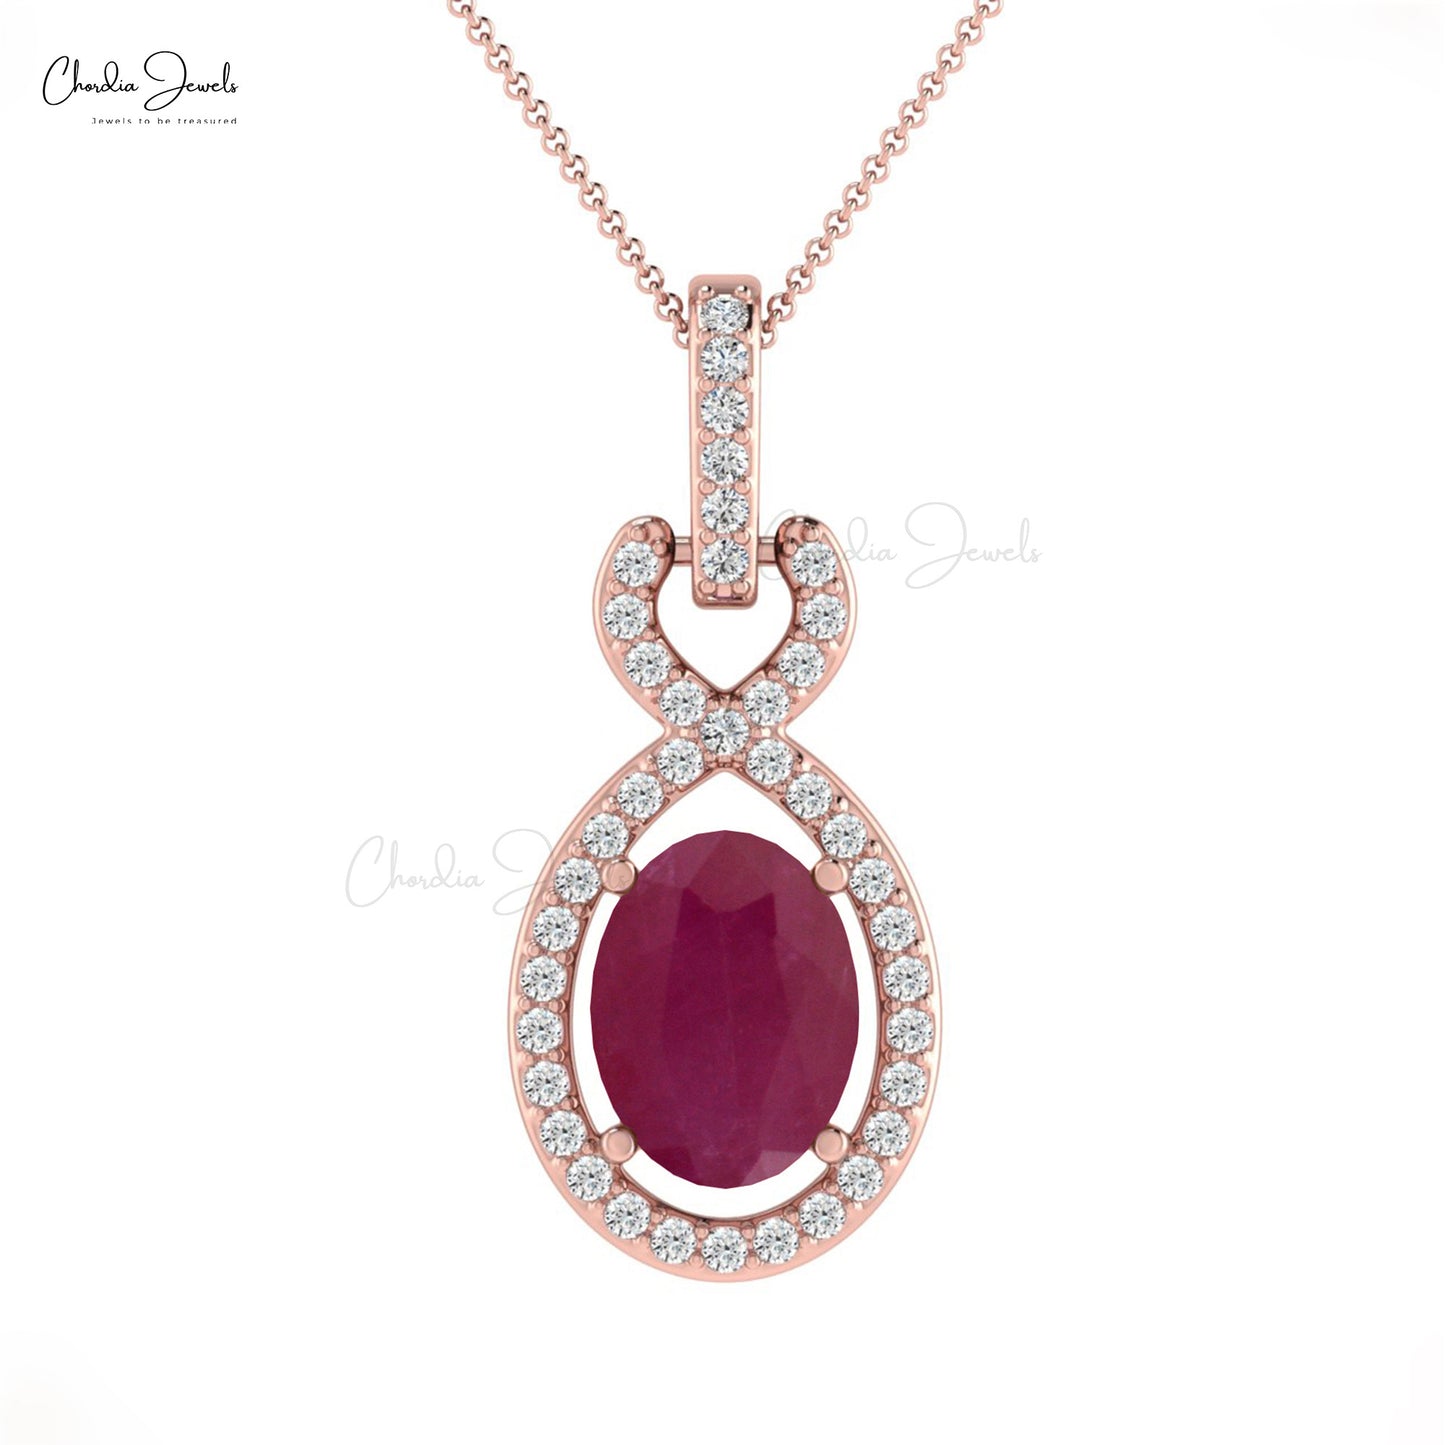 Load image into Gallery viewer, Round Ruby and Diamond Halo Bail Pendant in 14k White Gold
